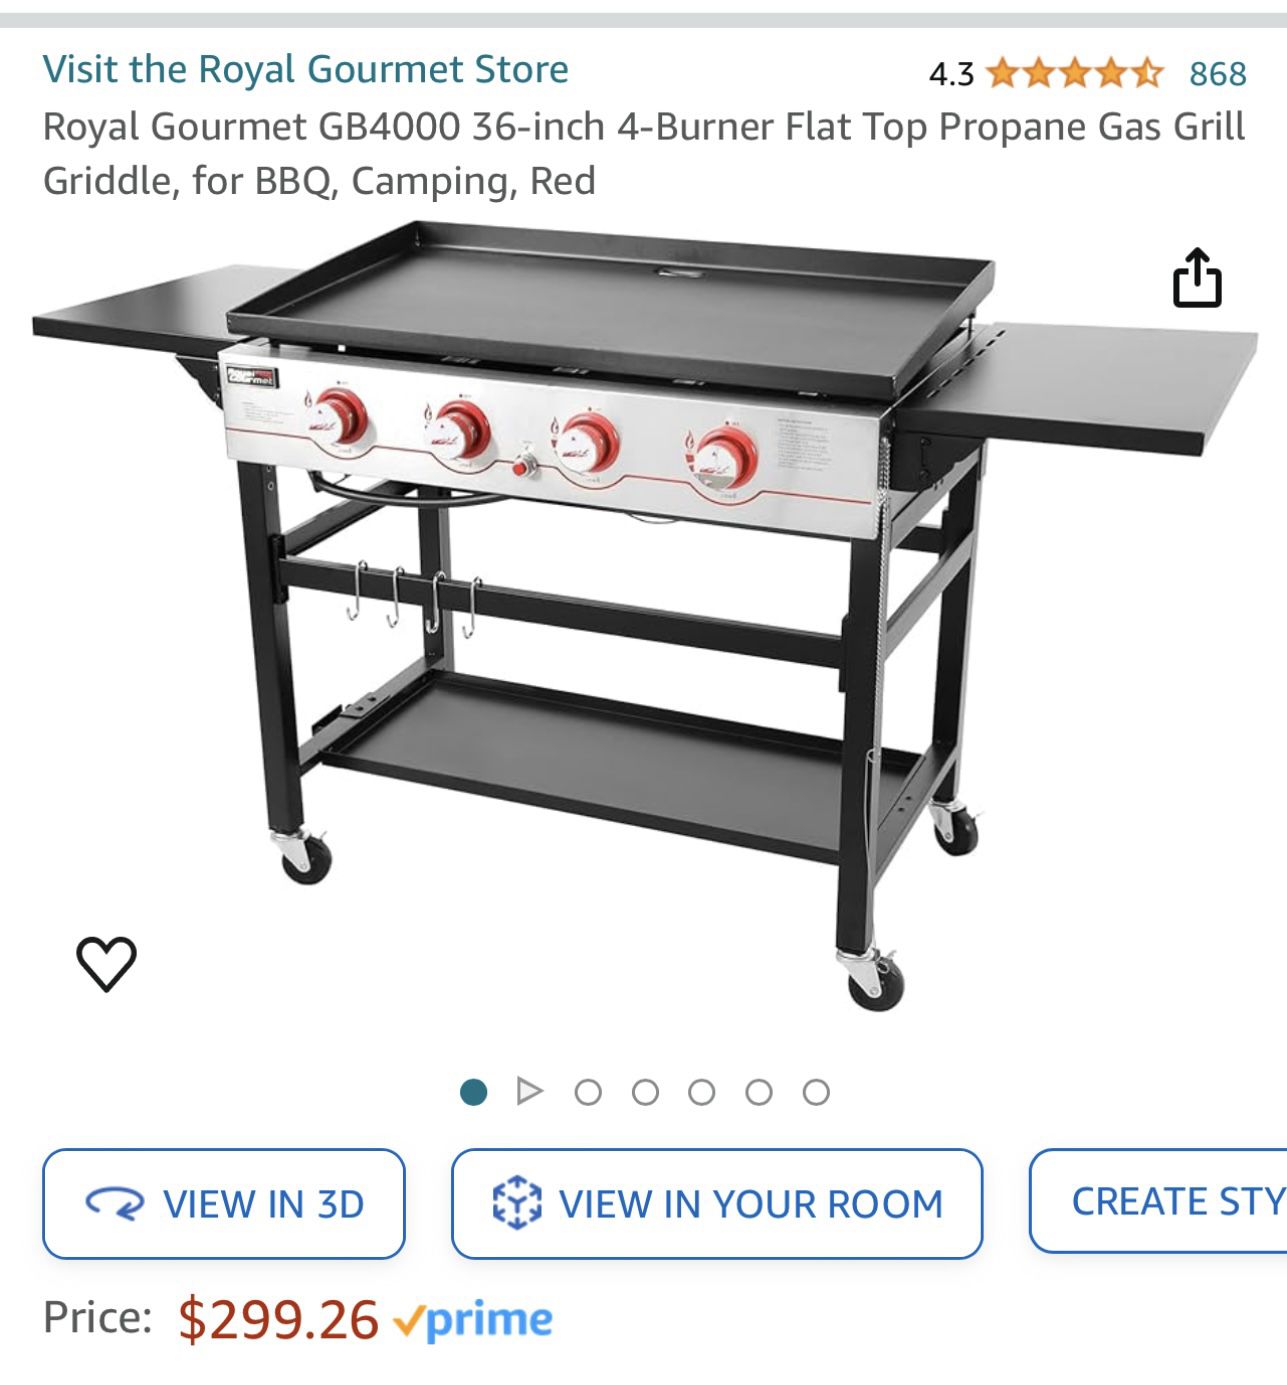 36-inch 4-Burner Flat Top Propane Gas Grill Griddle